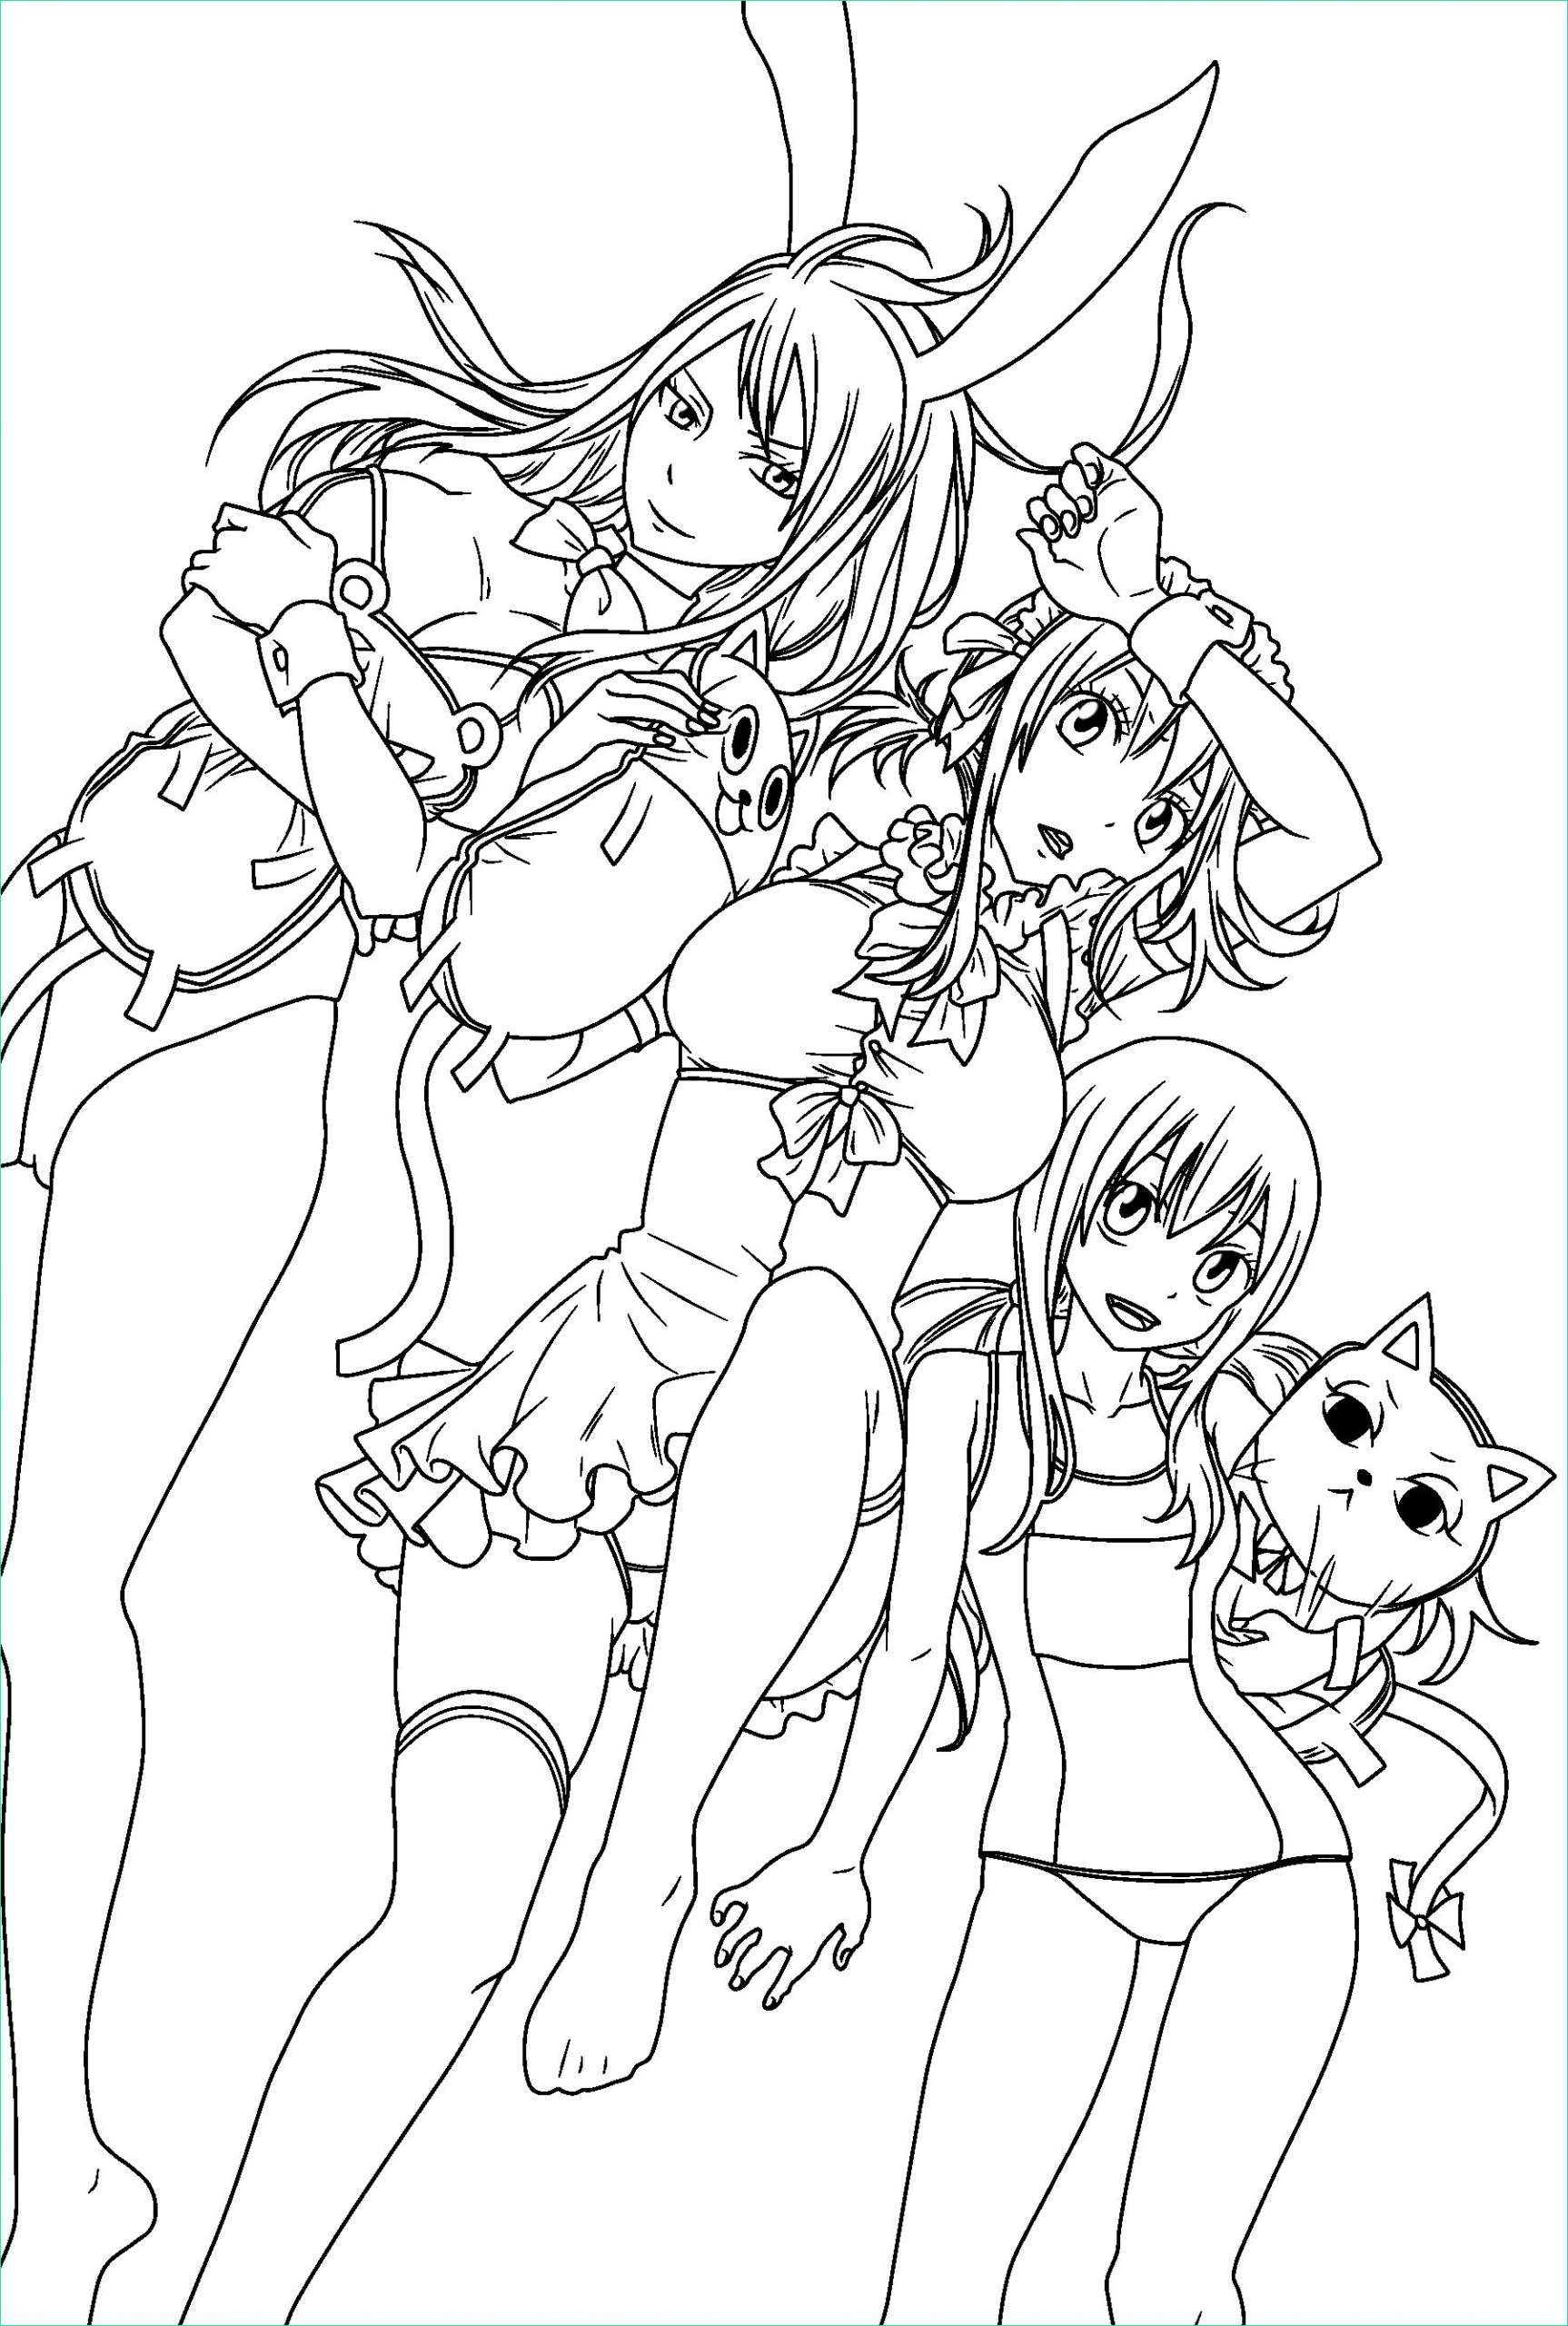 erza lucy and wendy